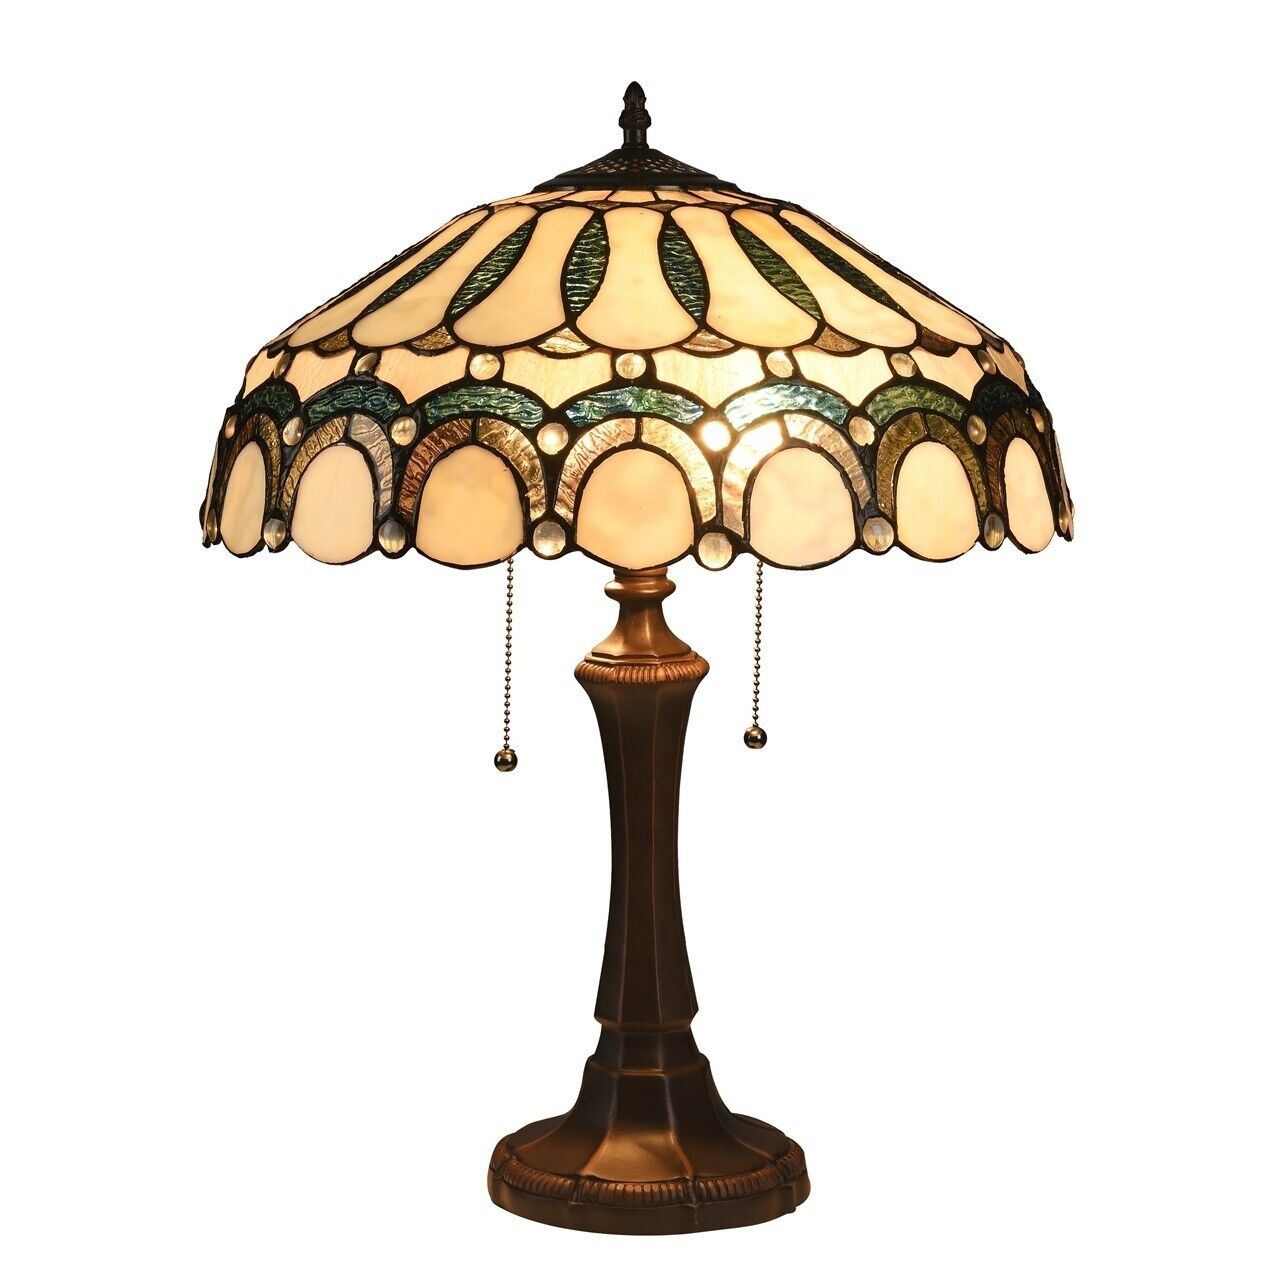 22” Tiffany Style Stained Glass Table Lamp with Victorian Design Shade